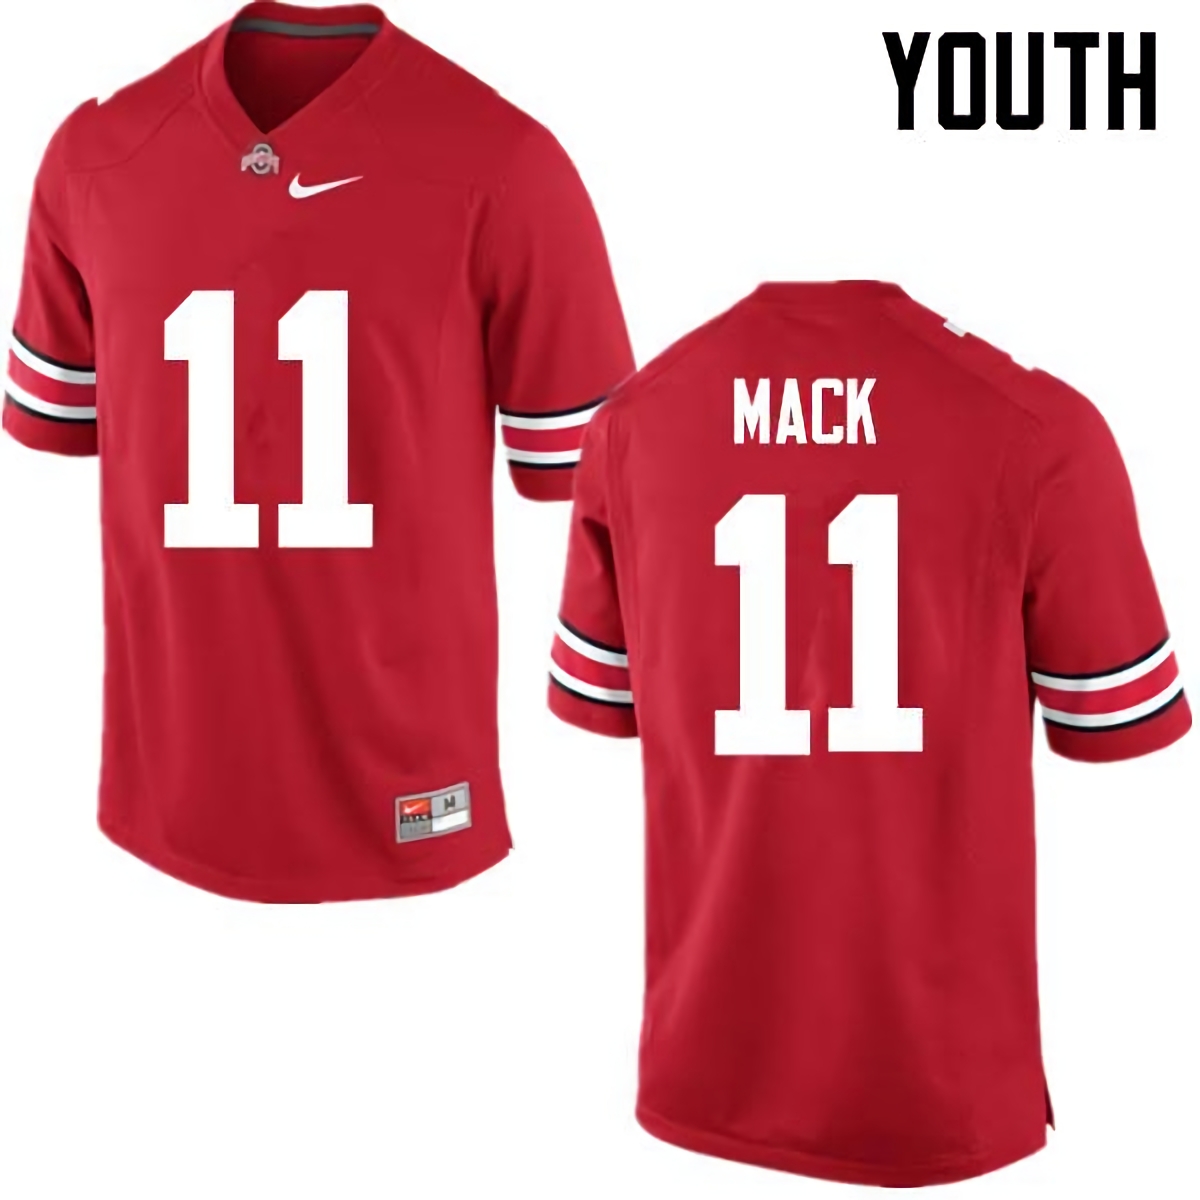 Austin Mack Ohio State Buckeyes Youth NCAA #11 Nike Red College Stitched Football Jersey MST1256XT